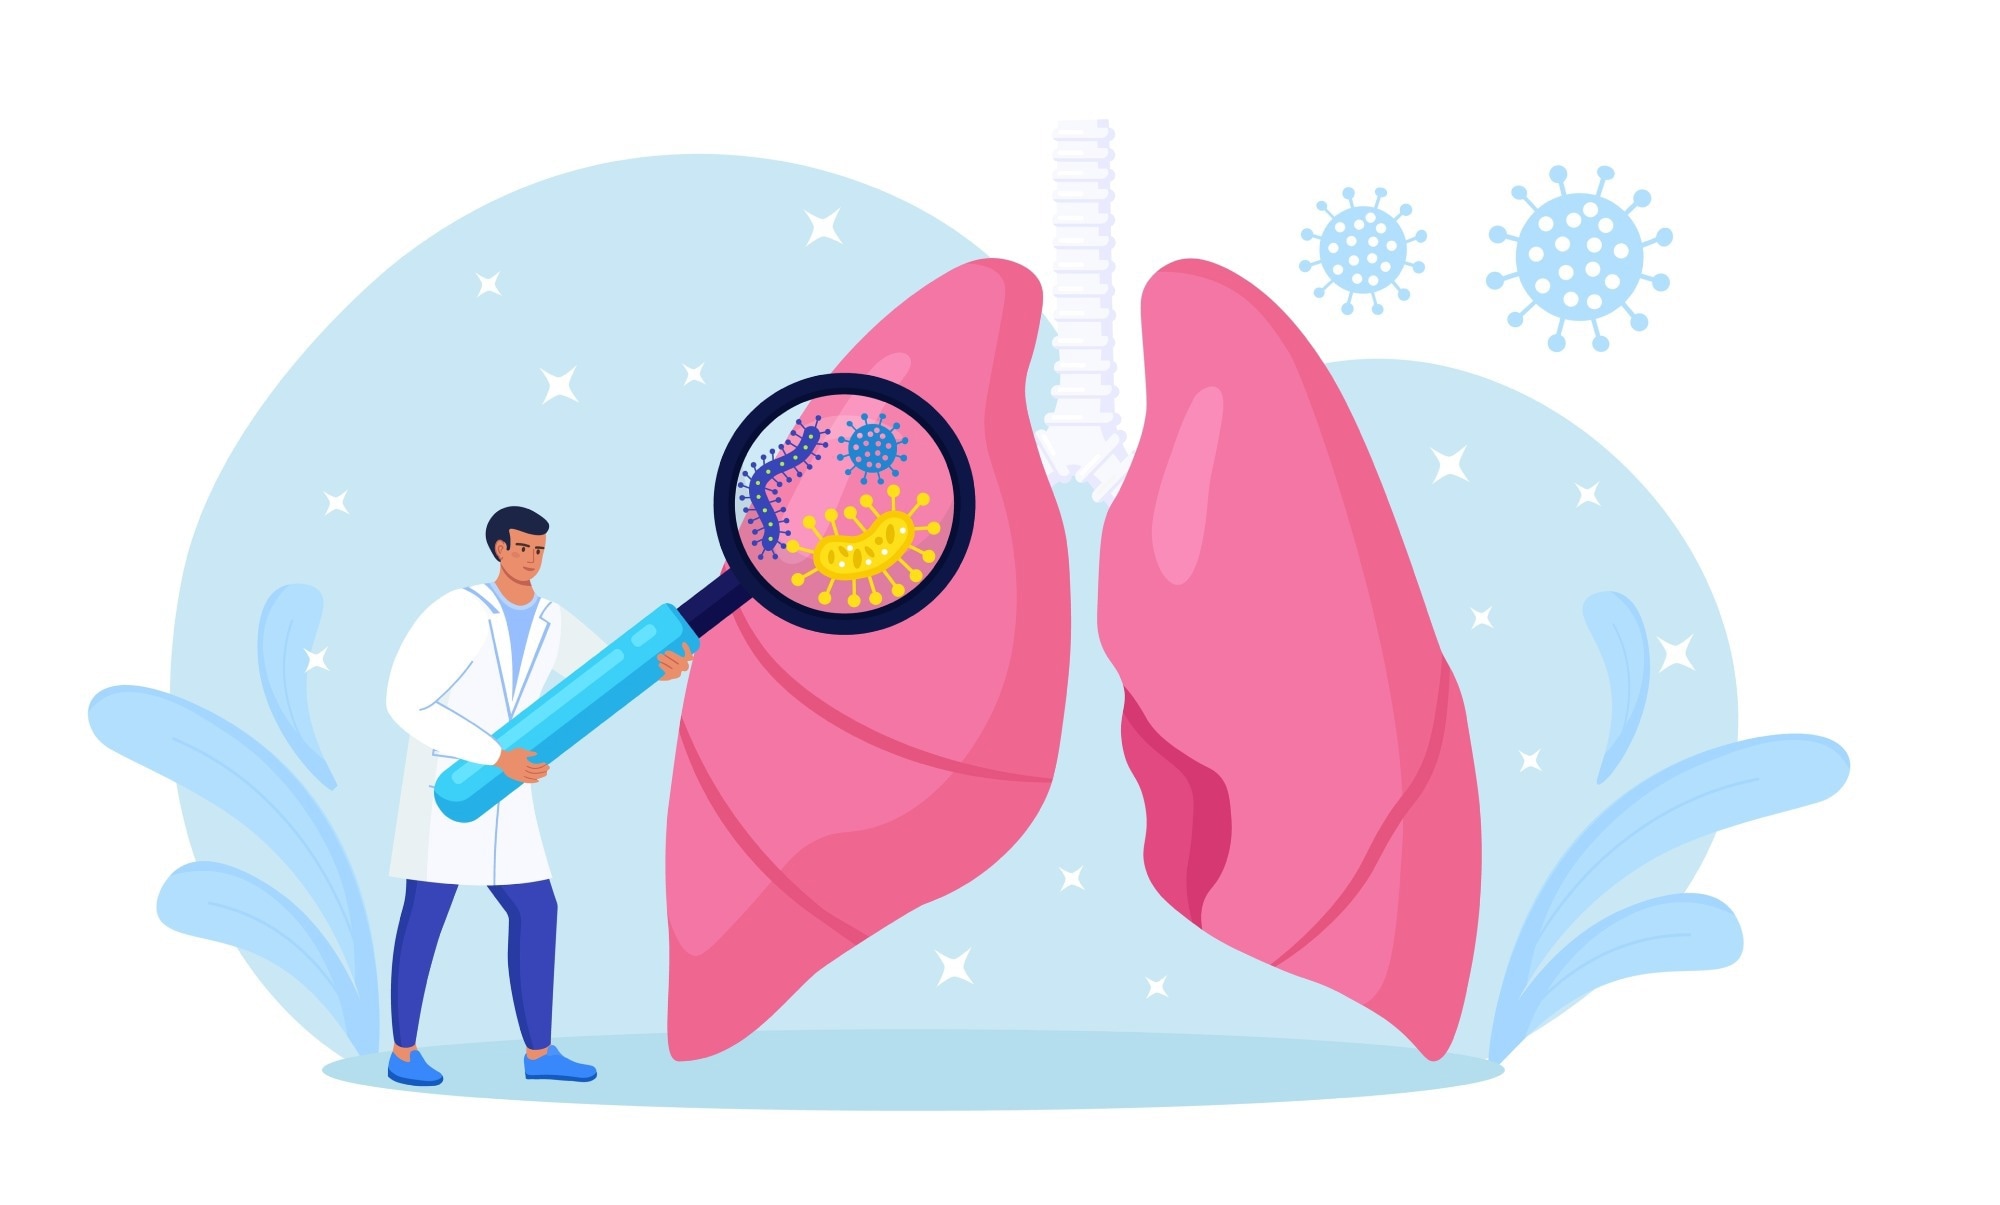 Study: Using Discarded Facial Tissues to Monitor and Diagnose Viral Respiratory Infections. Image Credit: Buravleva stock/Shutterstock